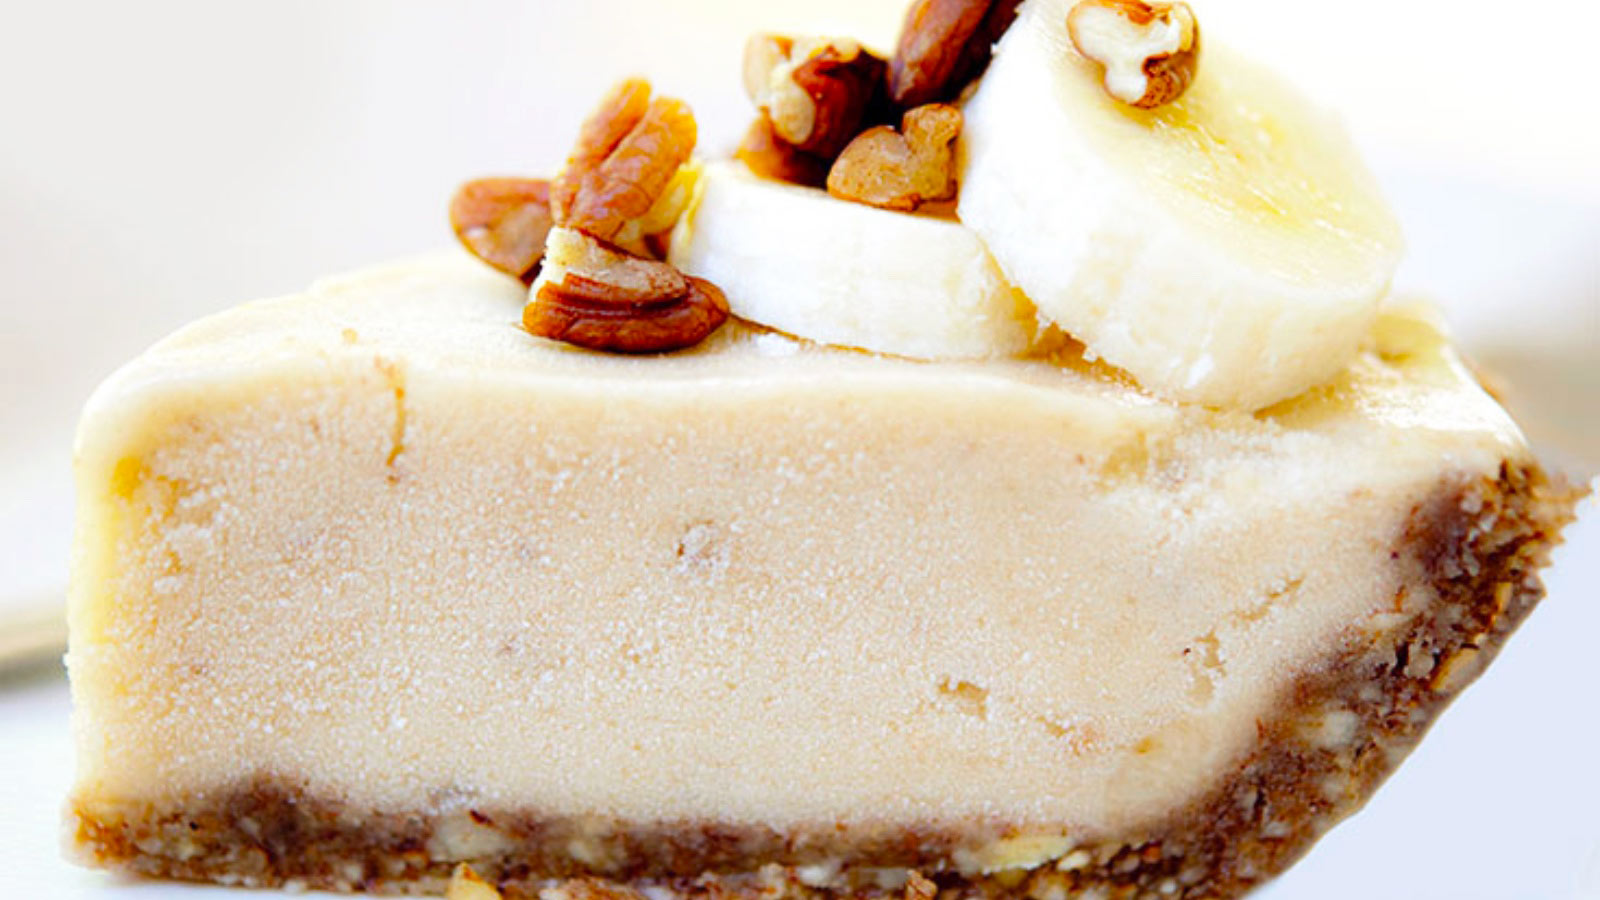 A slice of Ice Cream Pie from the side shows a nice thick layer of filling with sliced bananas and pecan pieces on top. White background.